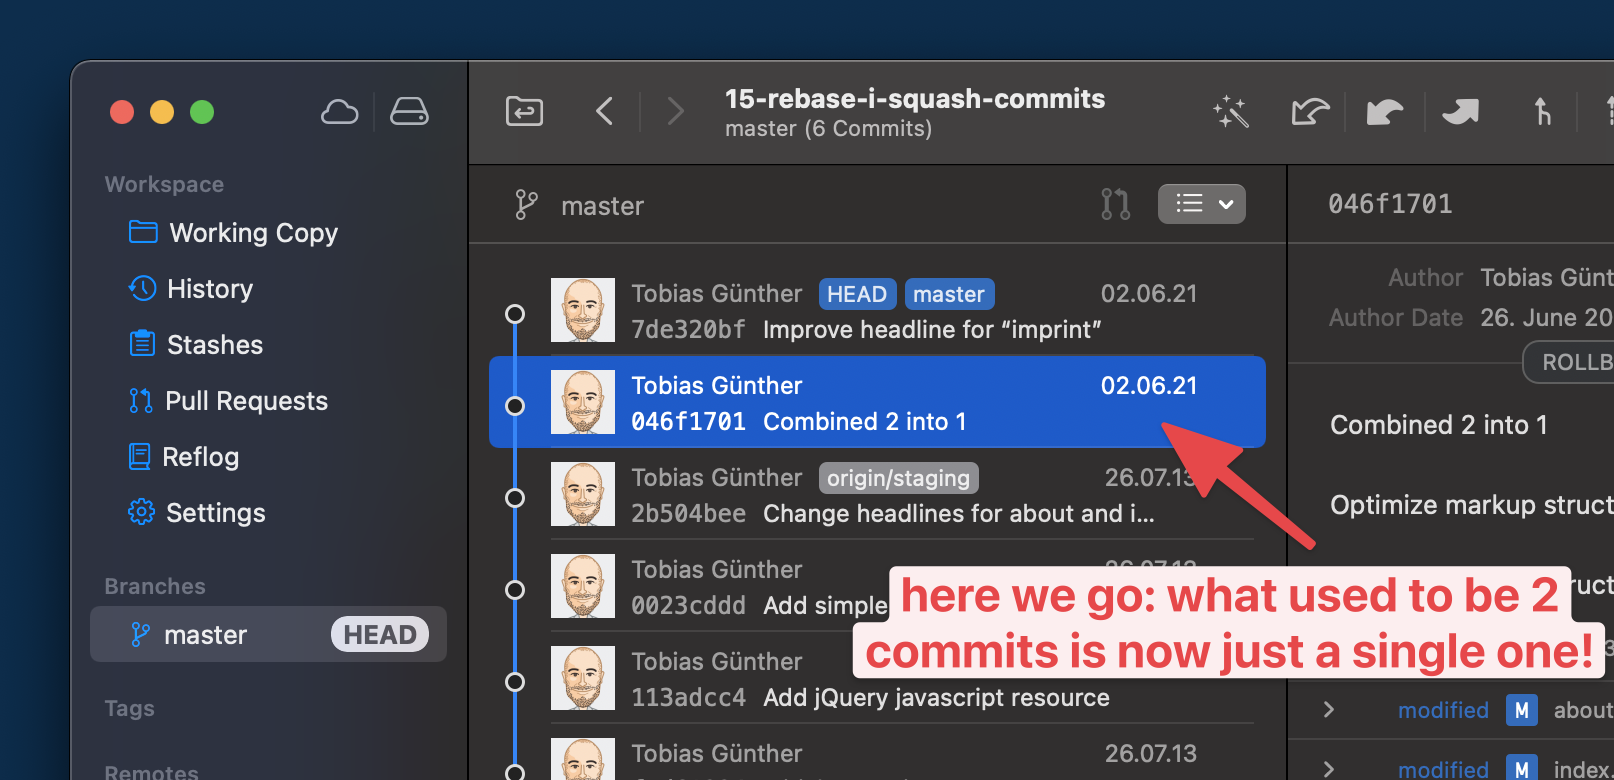 Finally, after closing the editor, we can see our commits have been combined